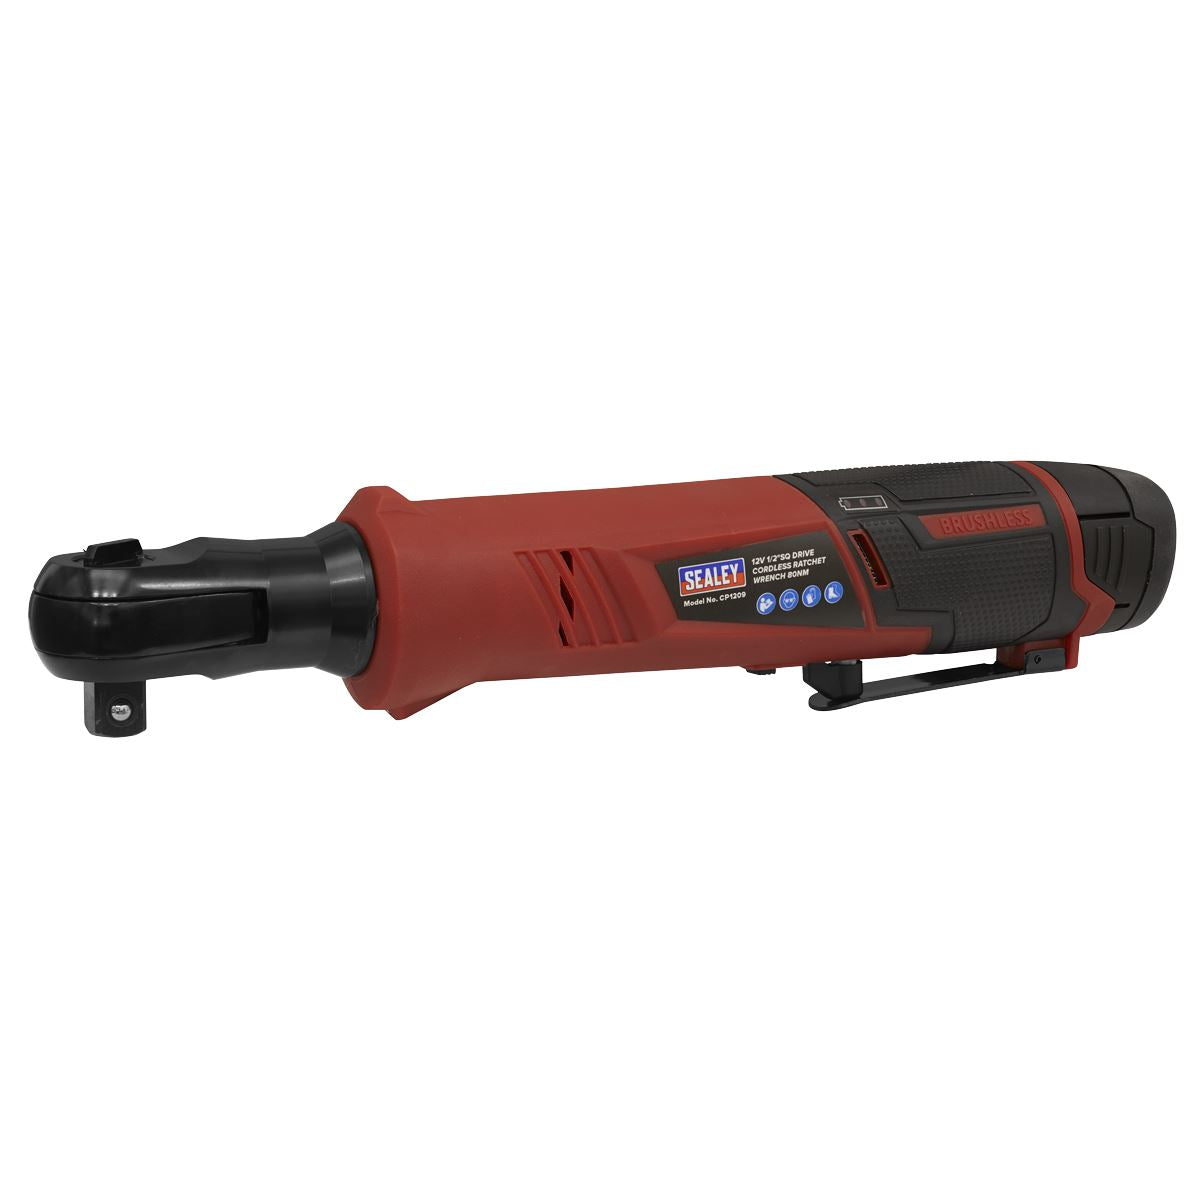 Sealey Cordless Ratchet Wrench 1/2"Sq Drive 12V Li-ion - Body Only CP1209